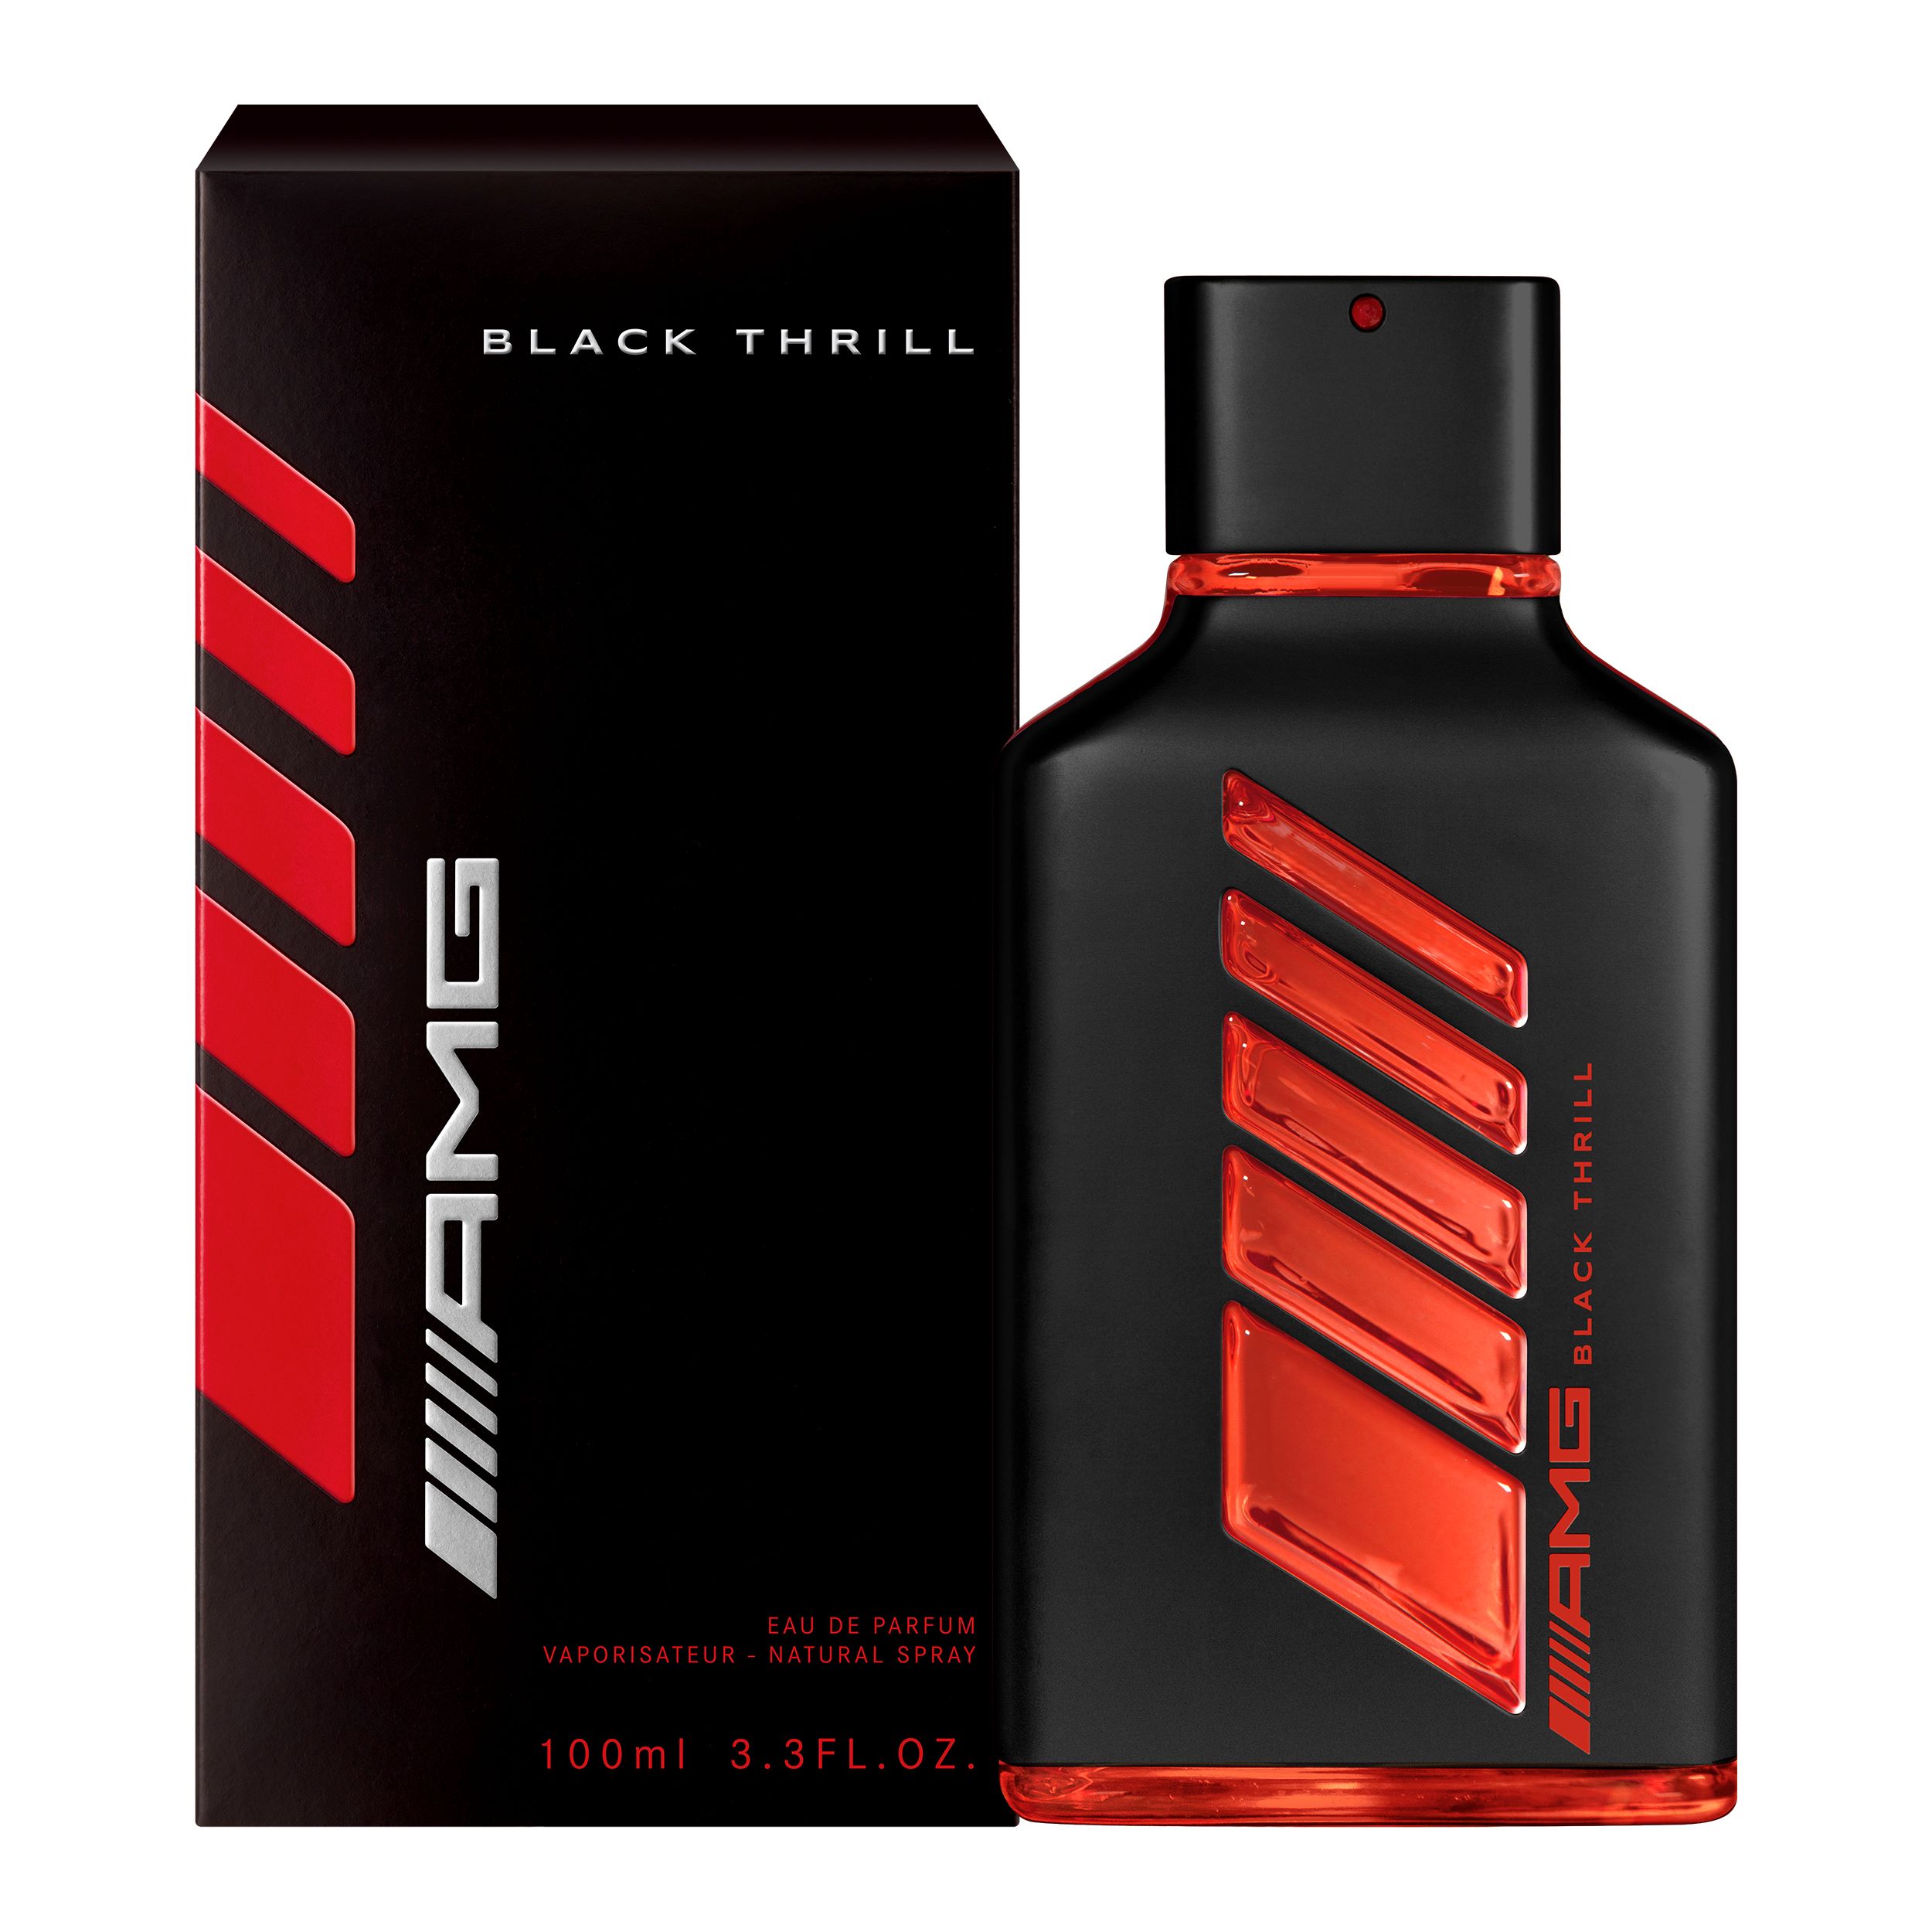 The 'Black Thrill' perfume from the new Mercedes-AMG fragrance range.